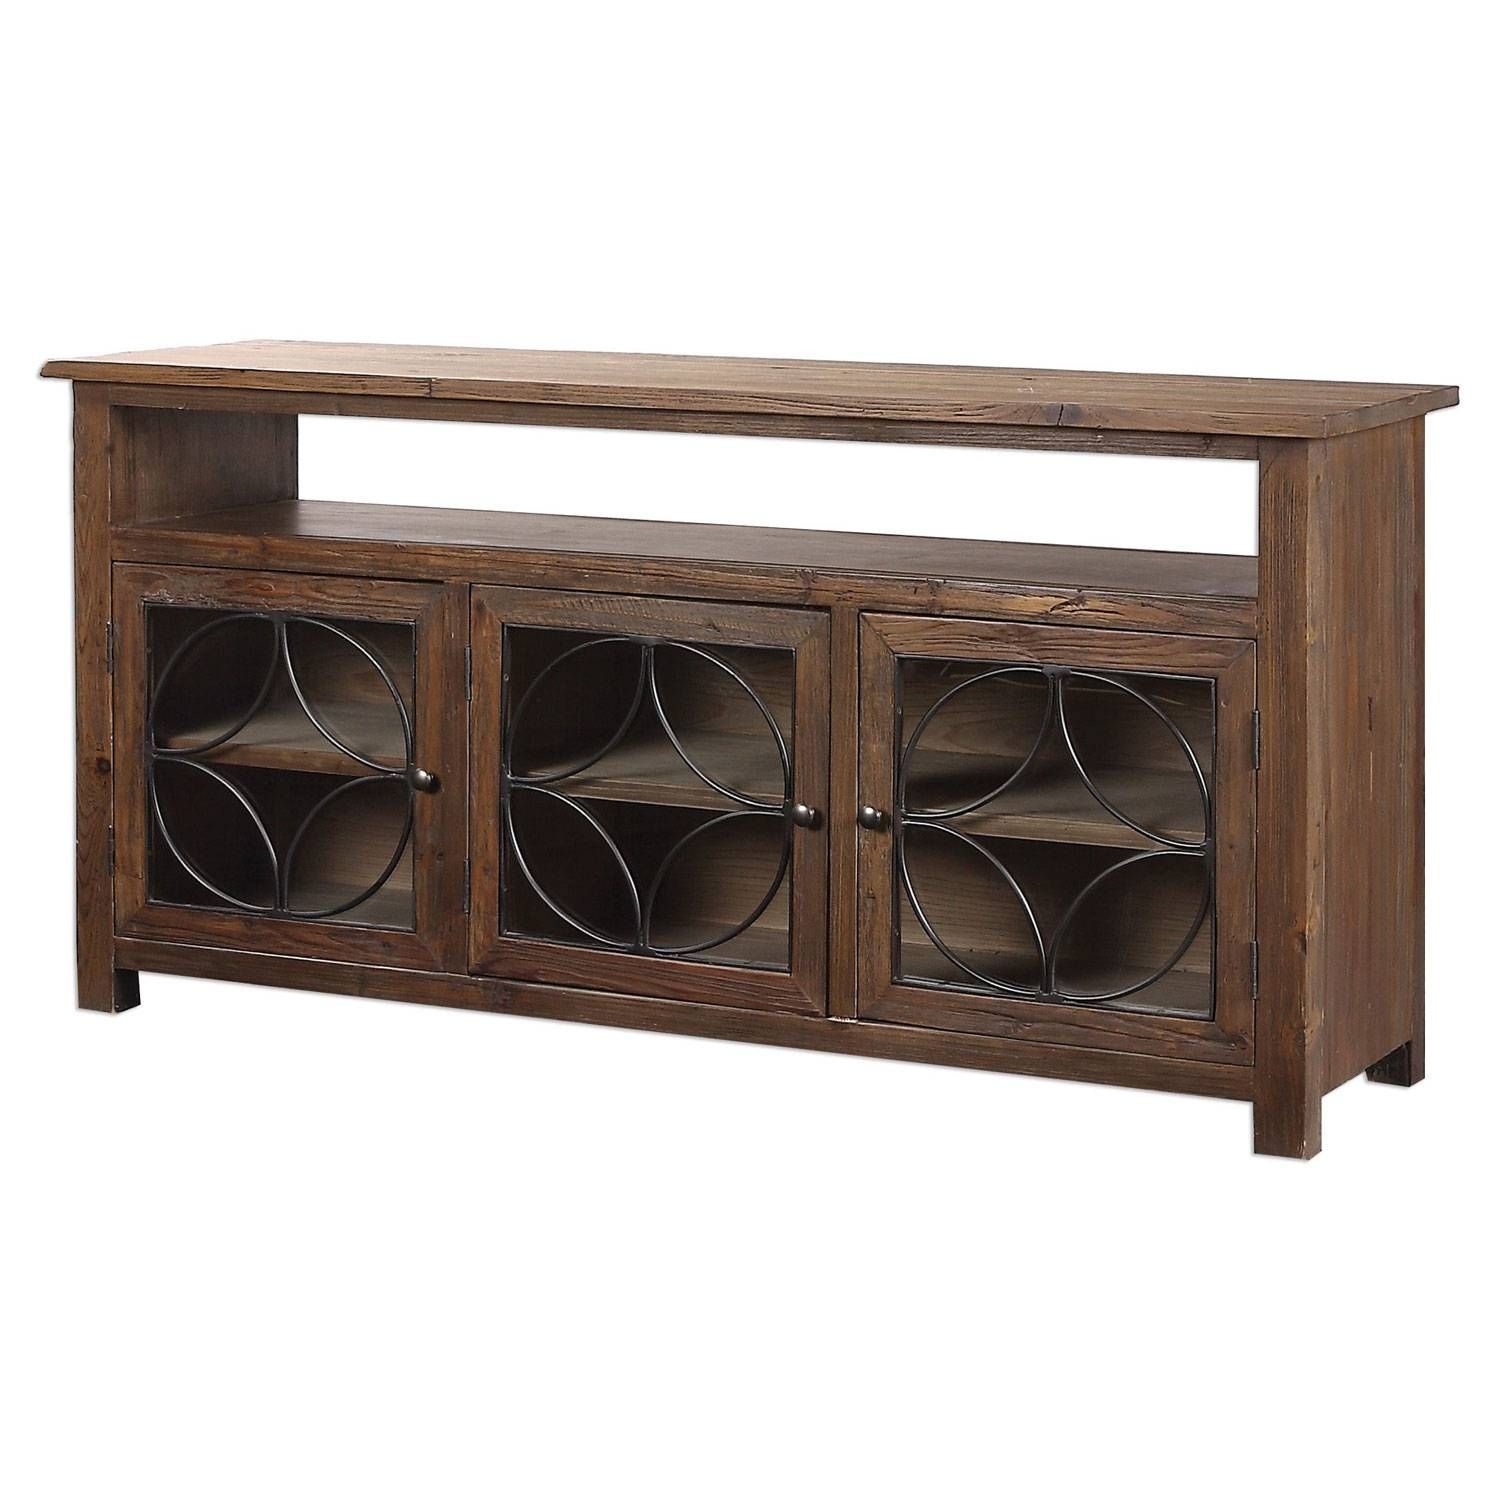 Buffets & Sideboards On Sale | Bellacor Intended For Newest 48 Inch Sideboards (View 12 of 15)